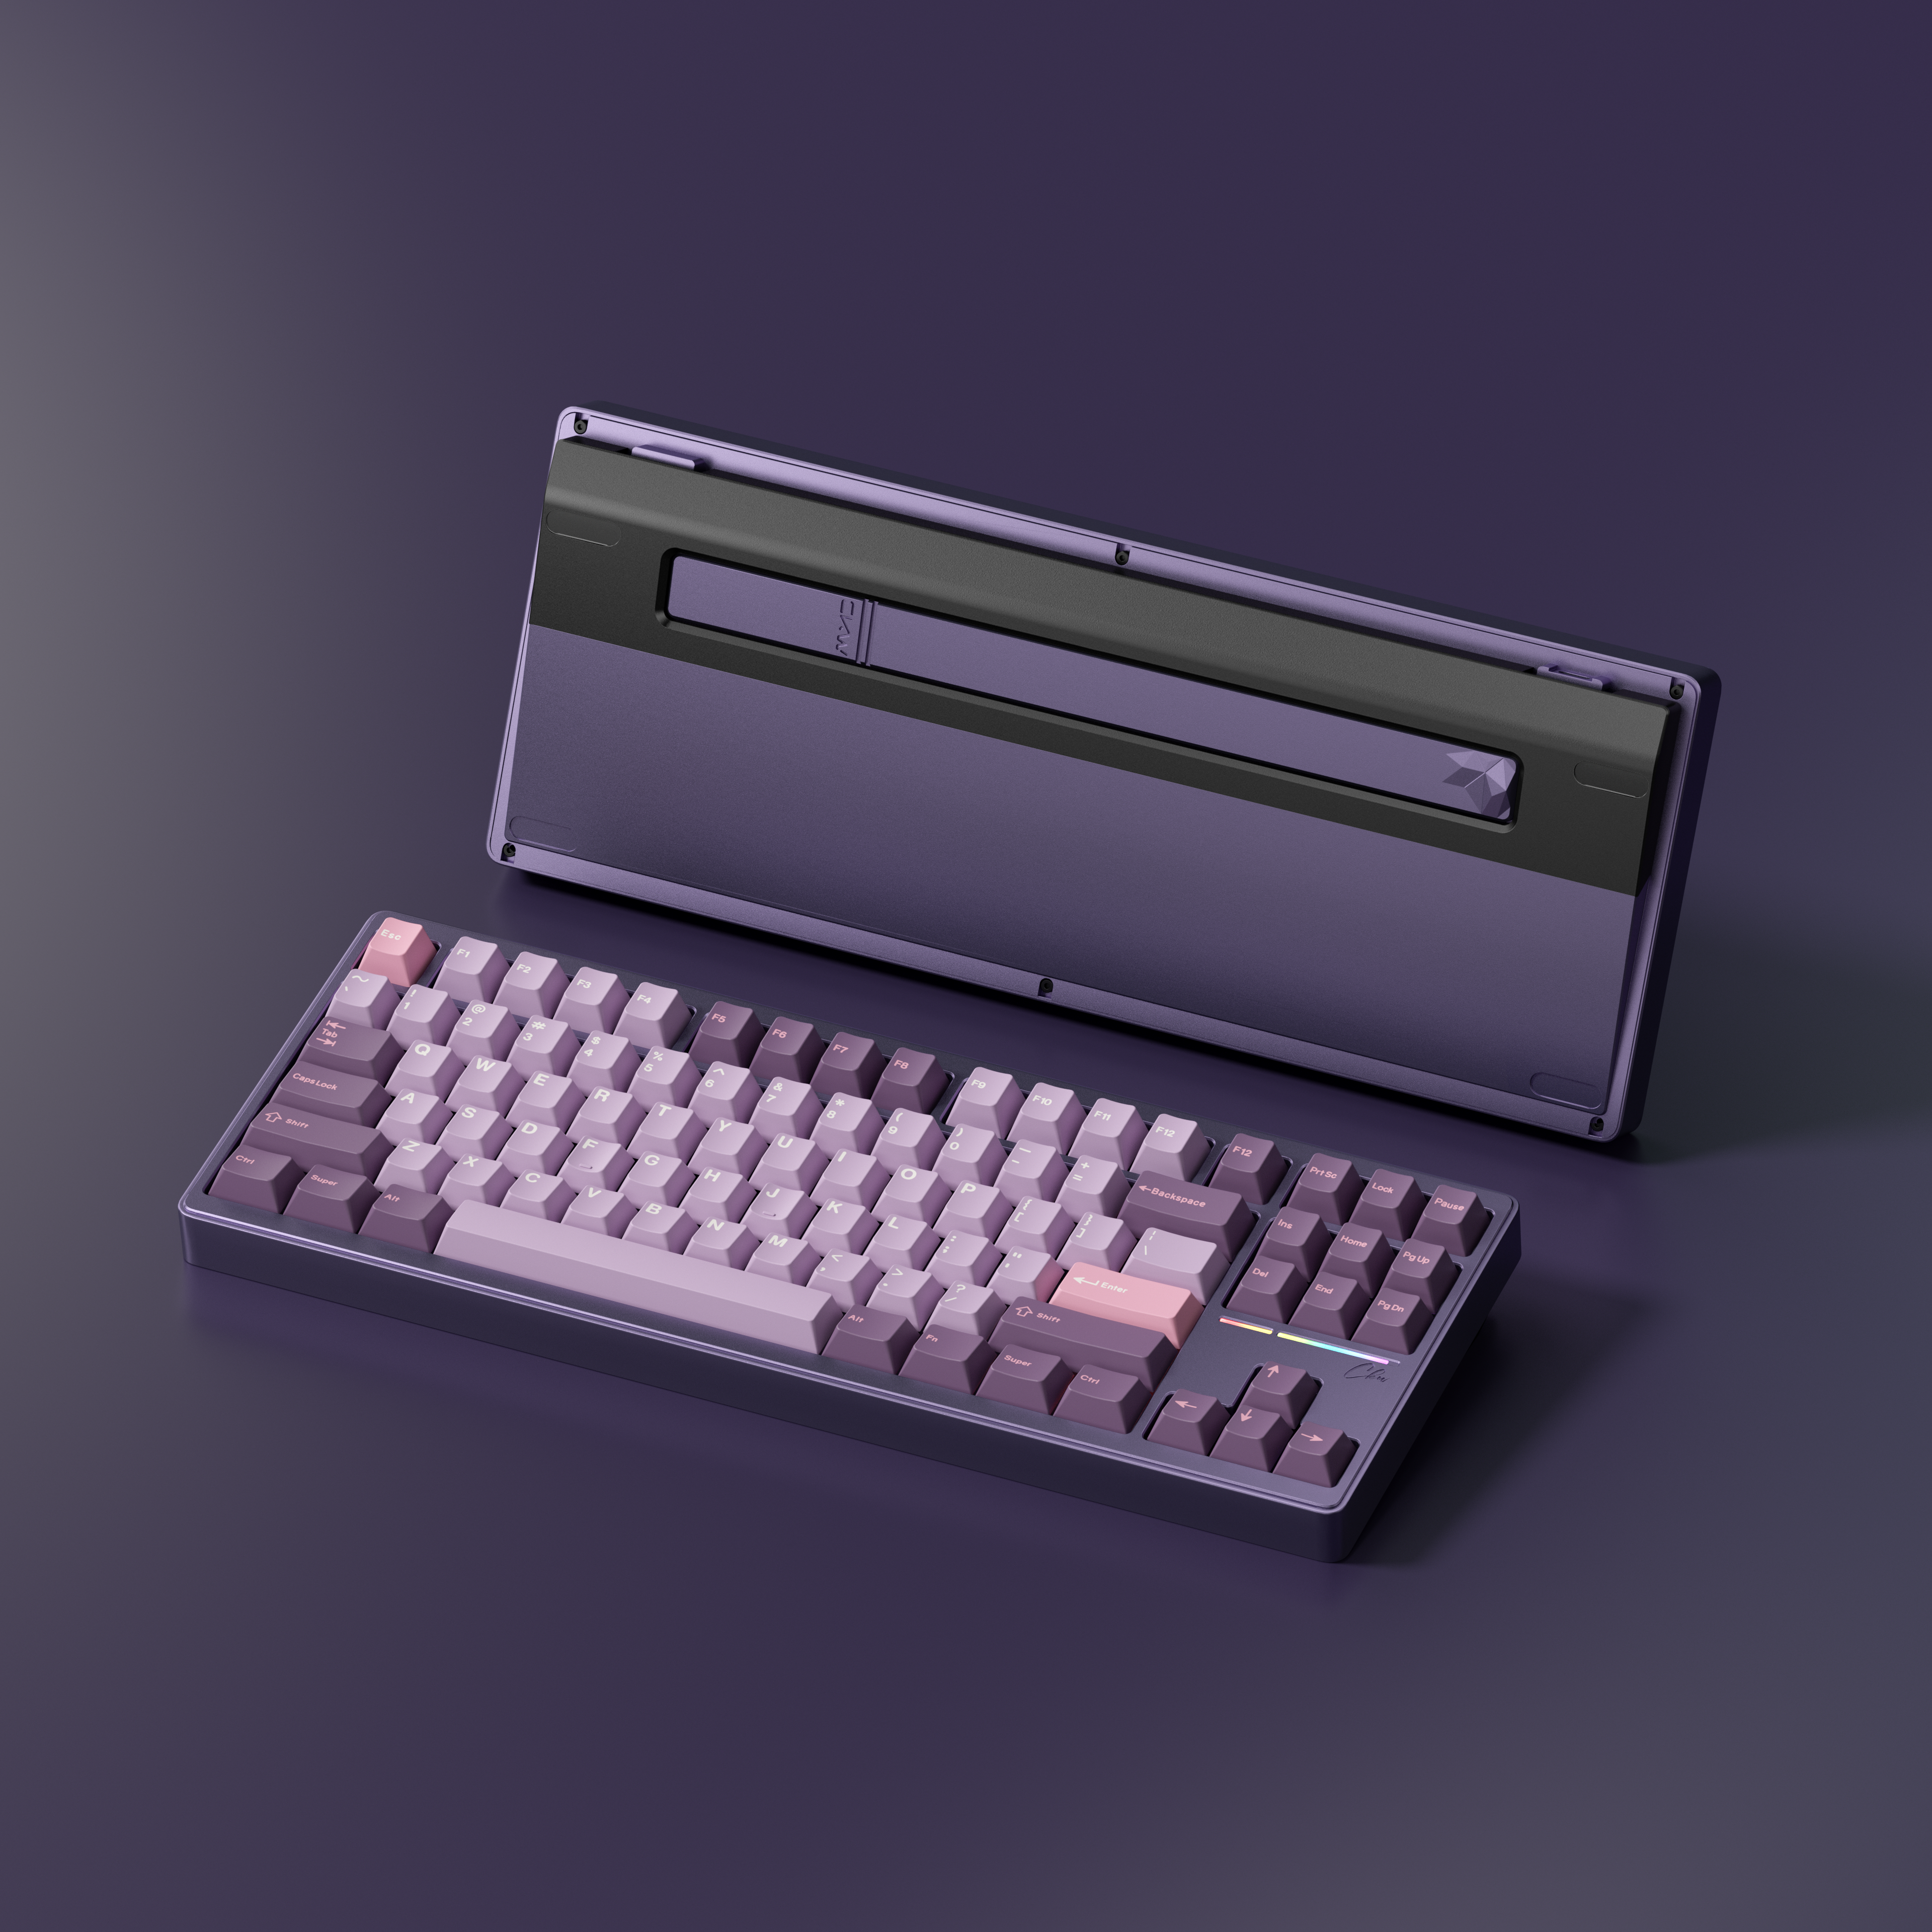 [EXTRA ]CKW80 - TKL/WKL, MORE THAN ONE TYPING FEEL OPTION WK / Purple / Black (Anodized Aluminum)